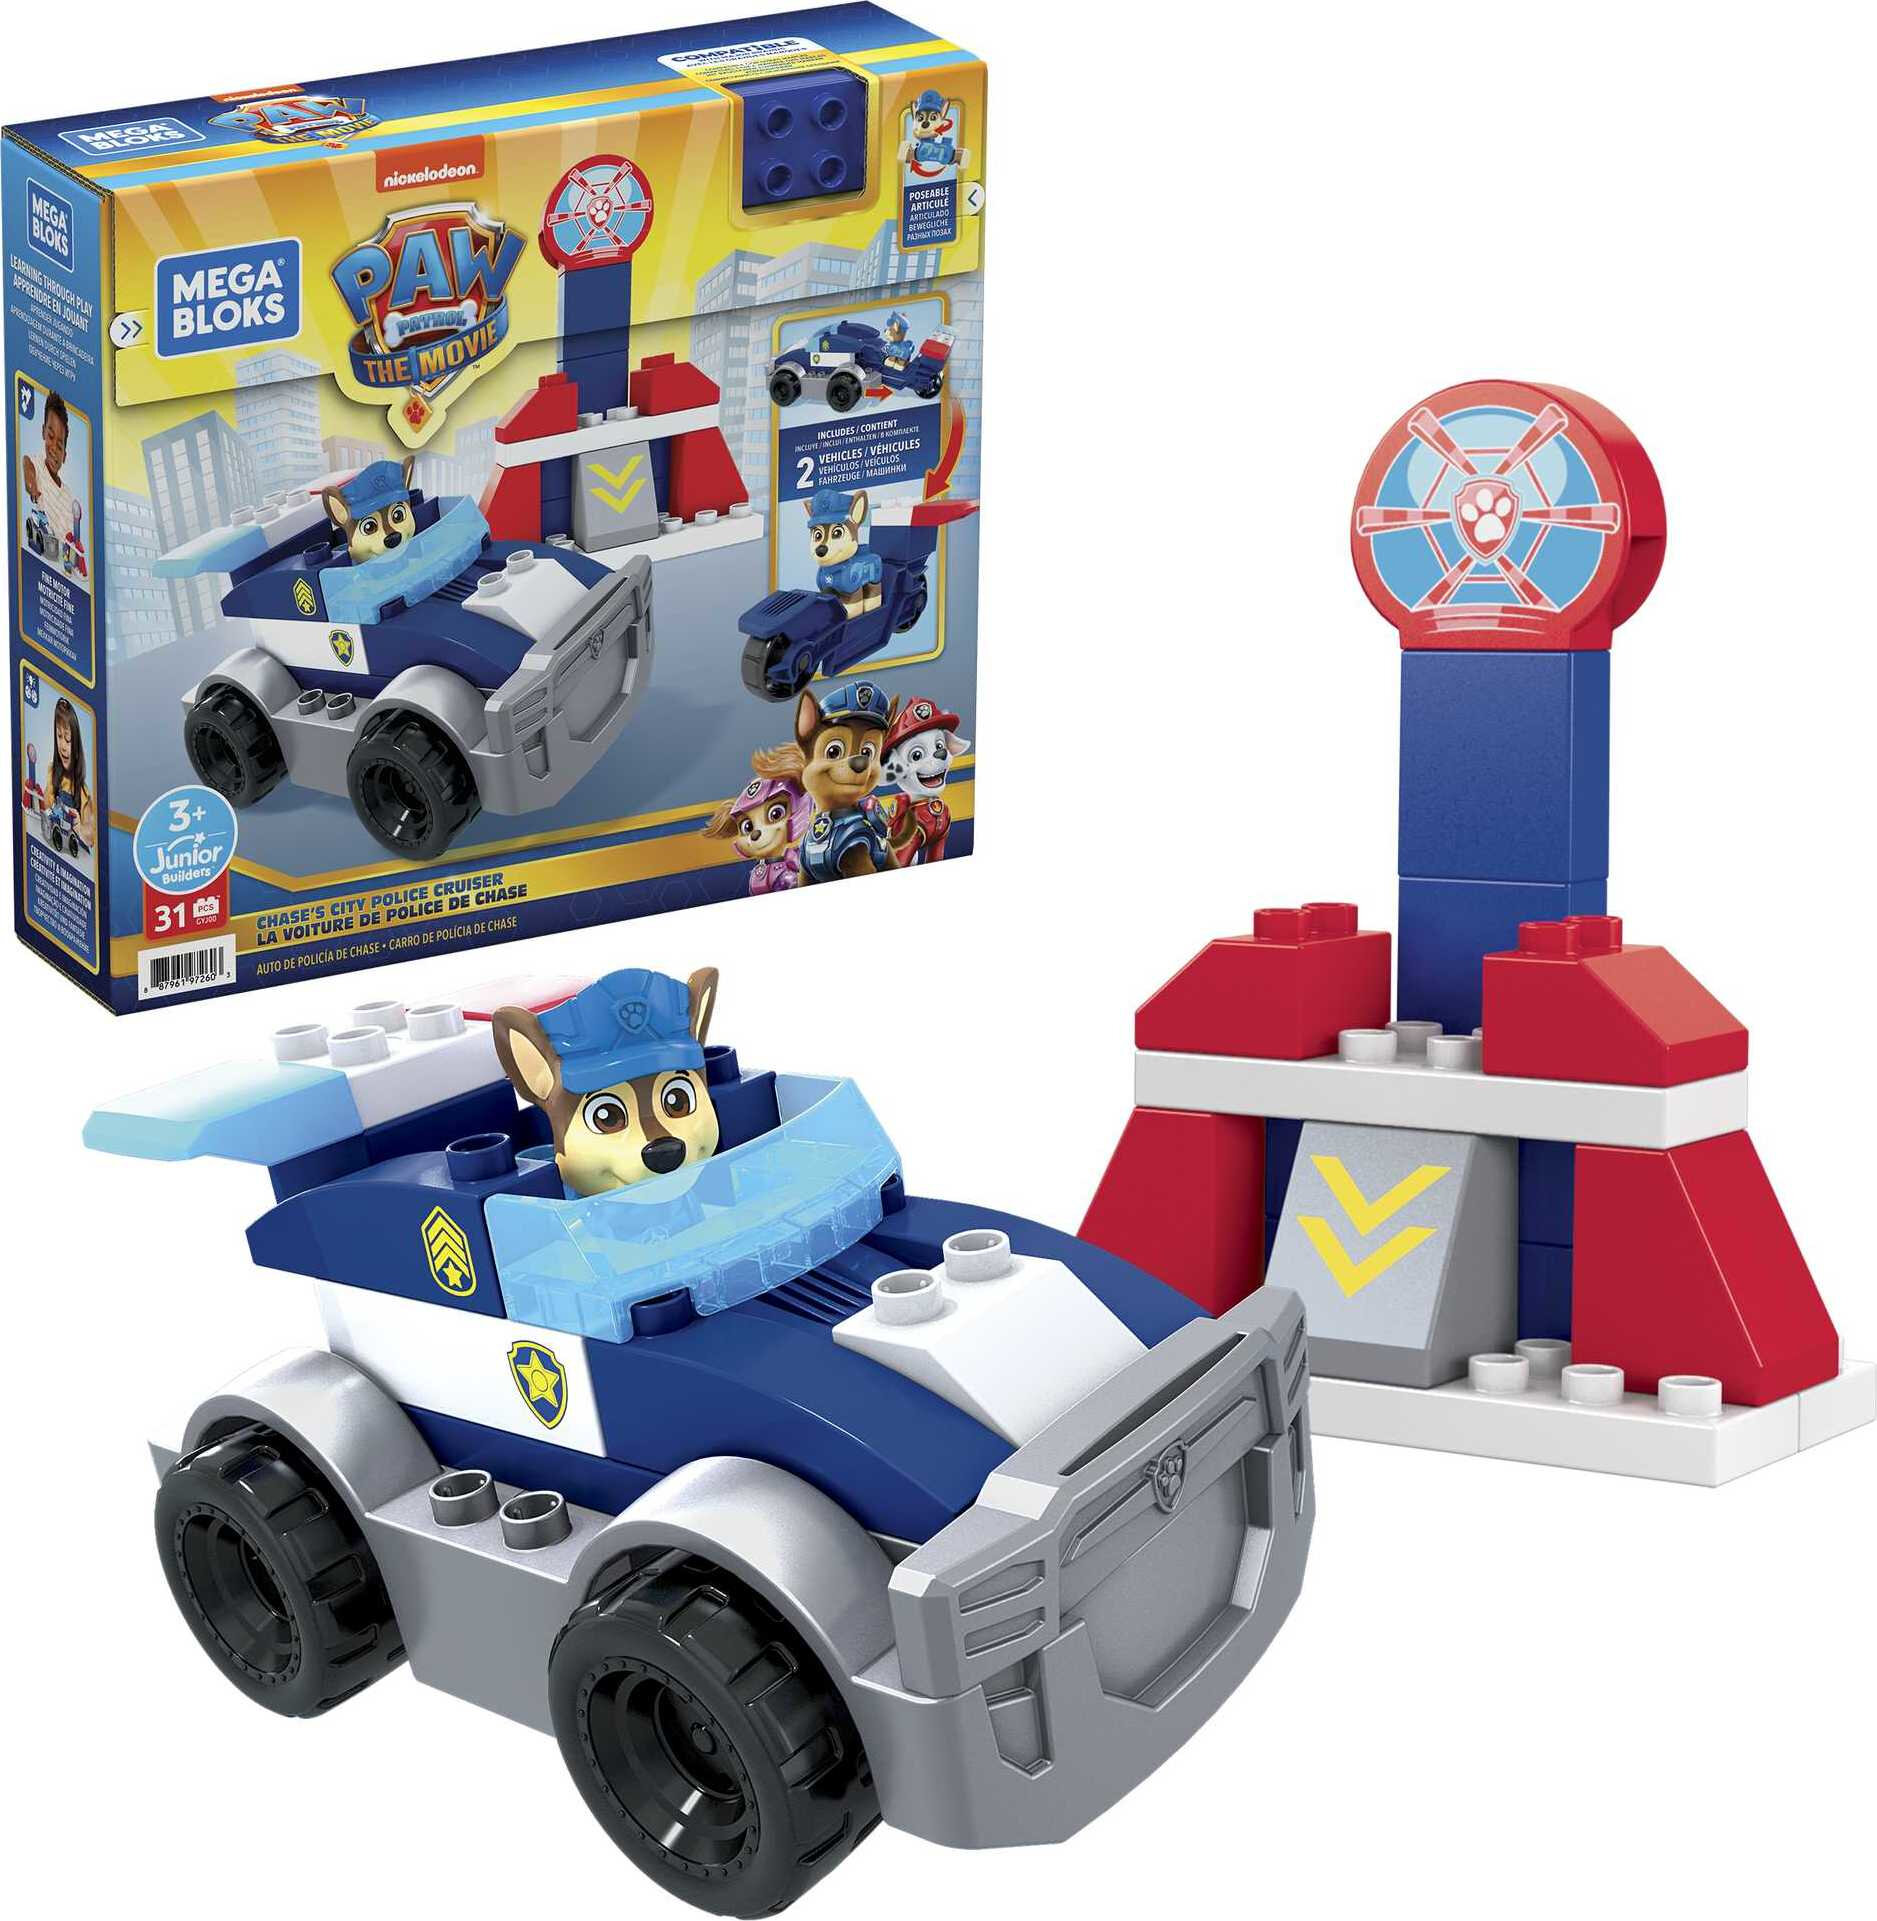 MEGA BLOKS PAW Patrol Toy Blocks Chase's City Police Cruiser with 1 Figure (31 Pieces) - image 1 of 7